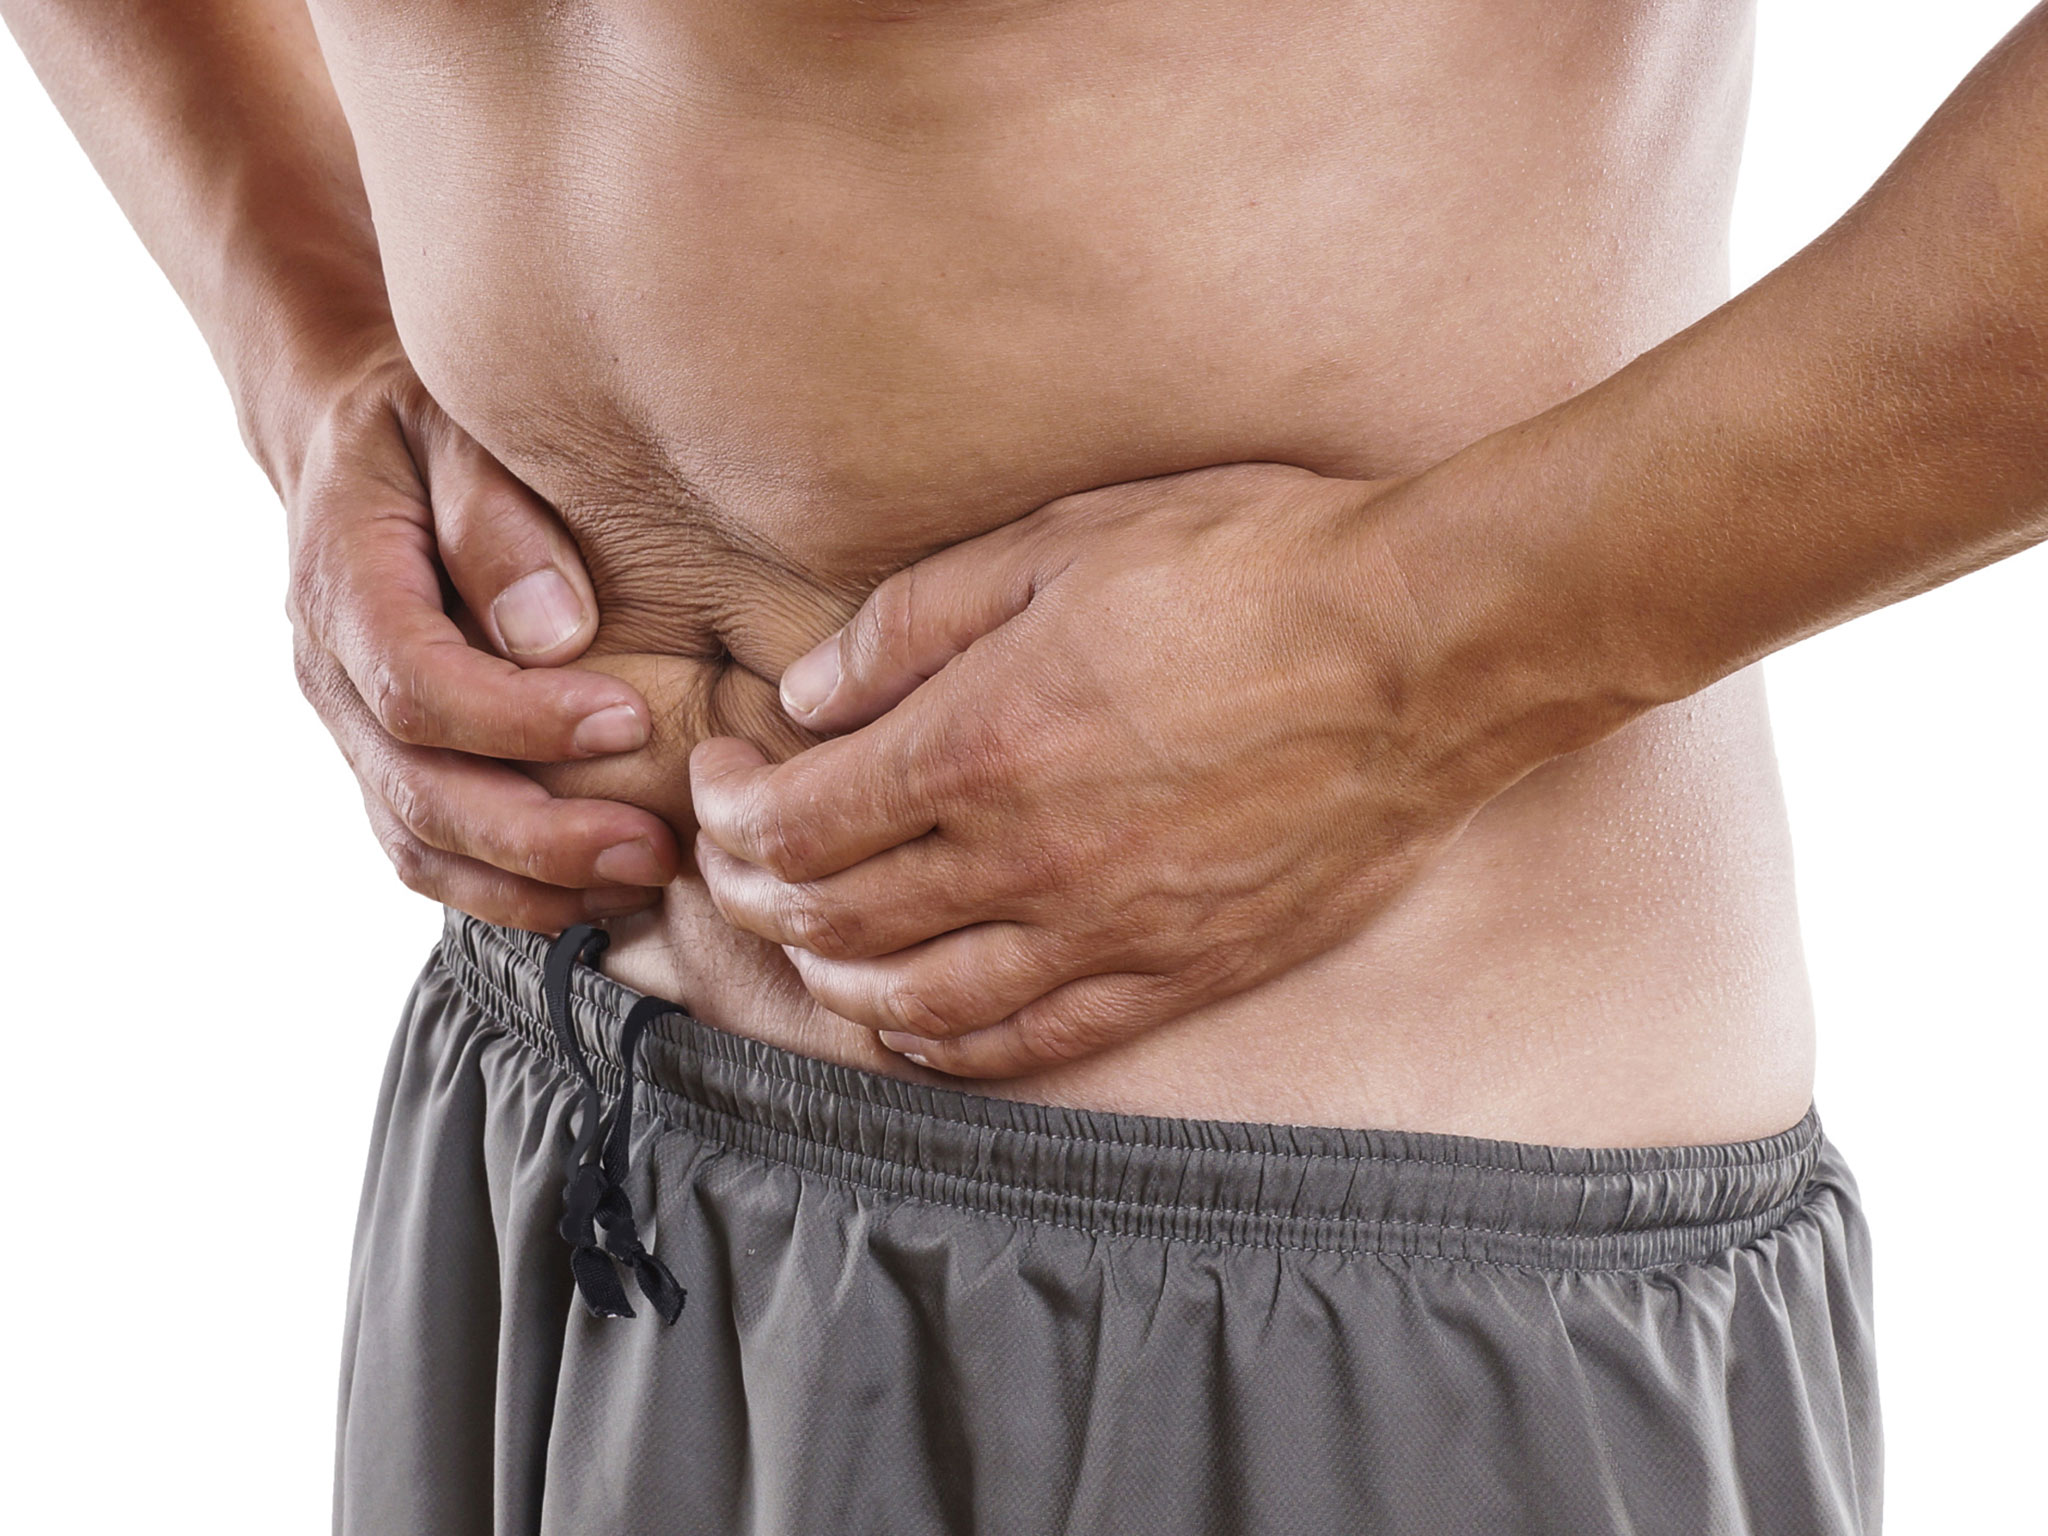 What are the Symptoms of Crohn's disease and the Treatment for Crohn's disease?